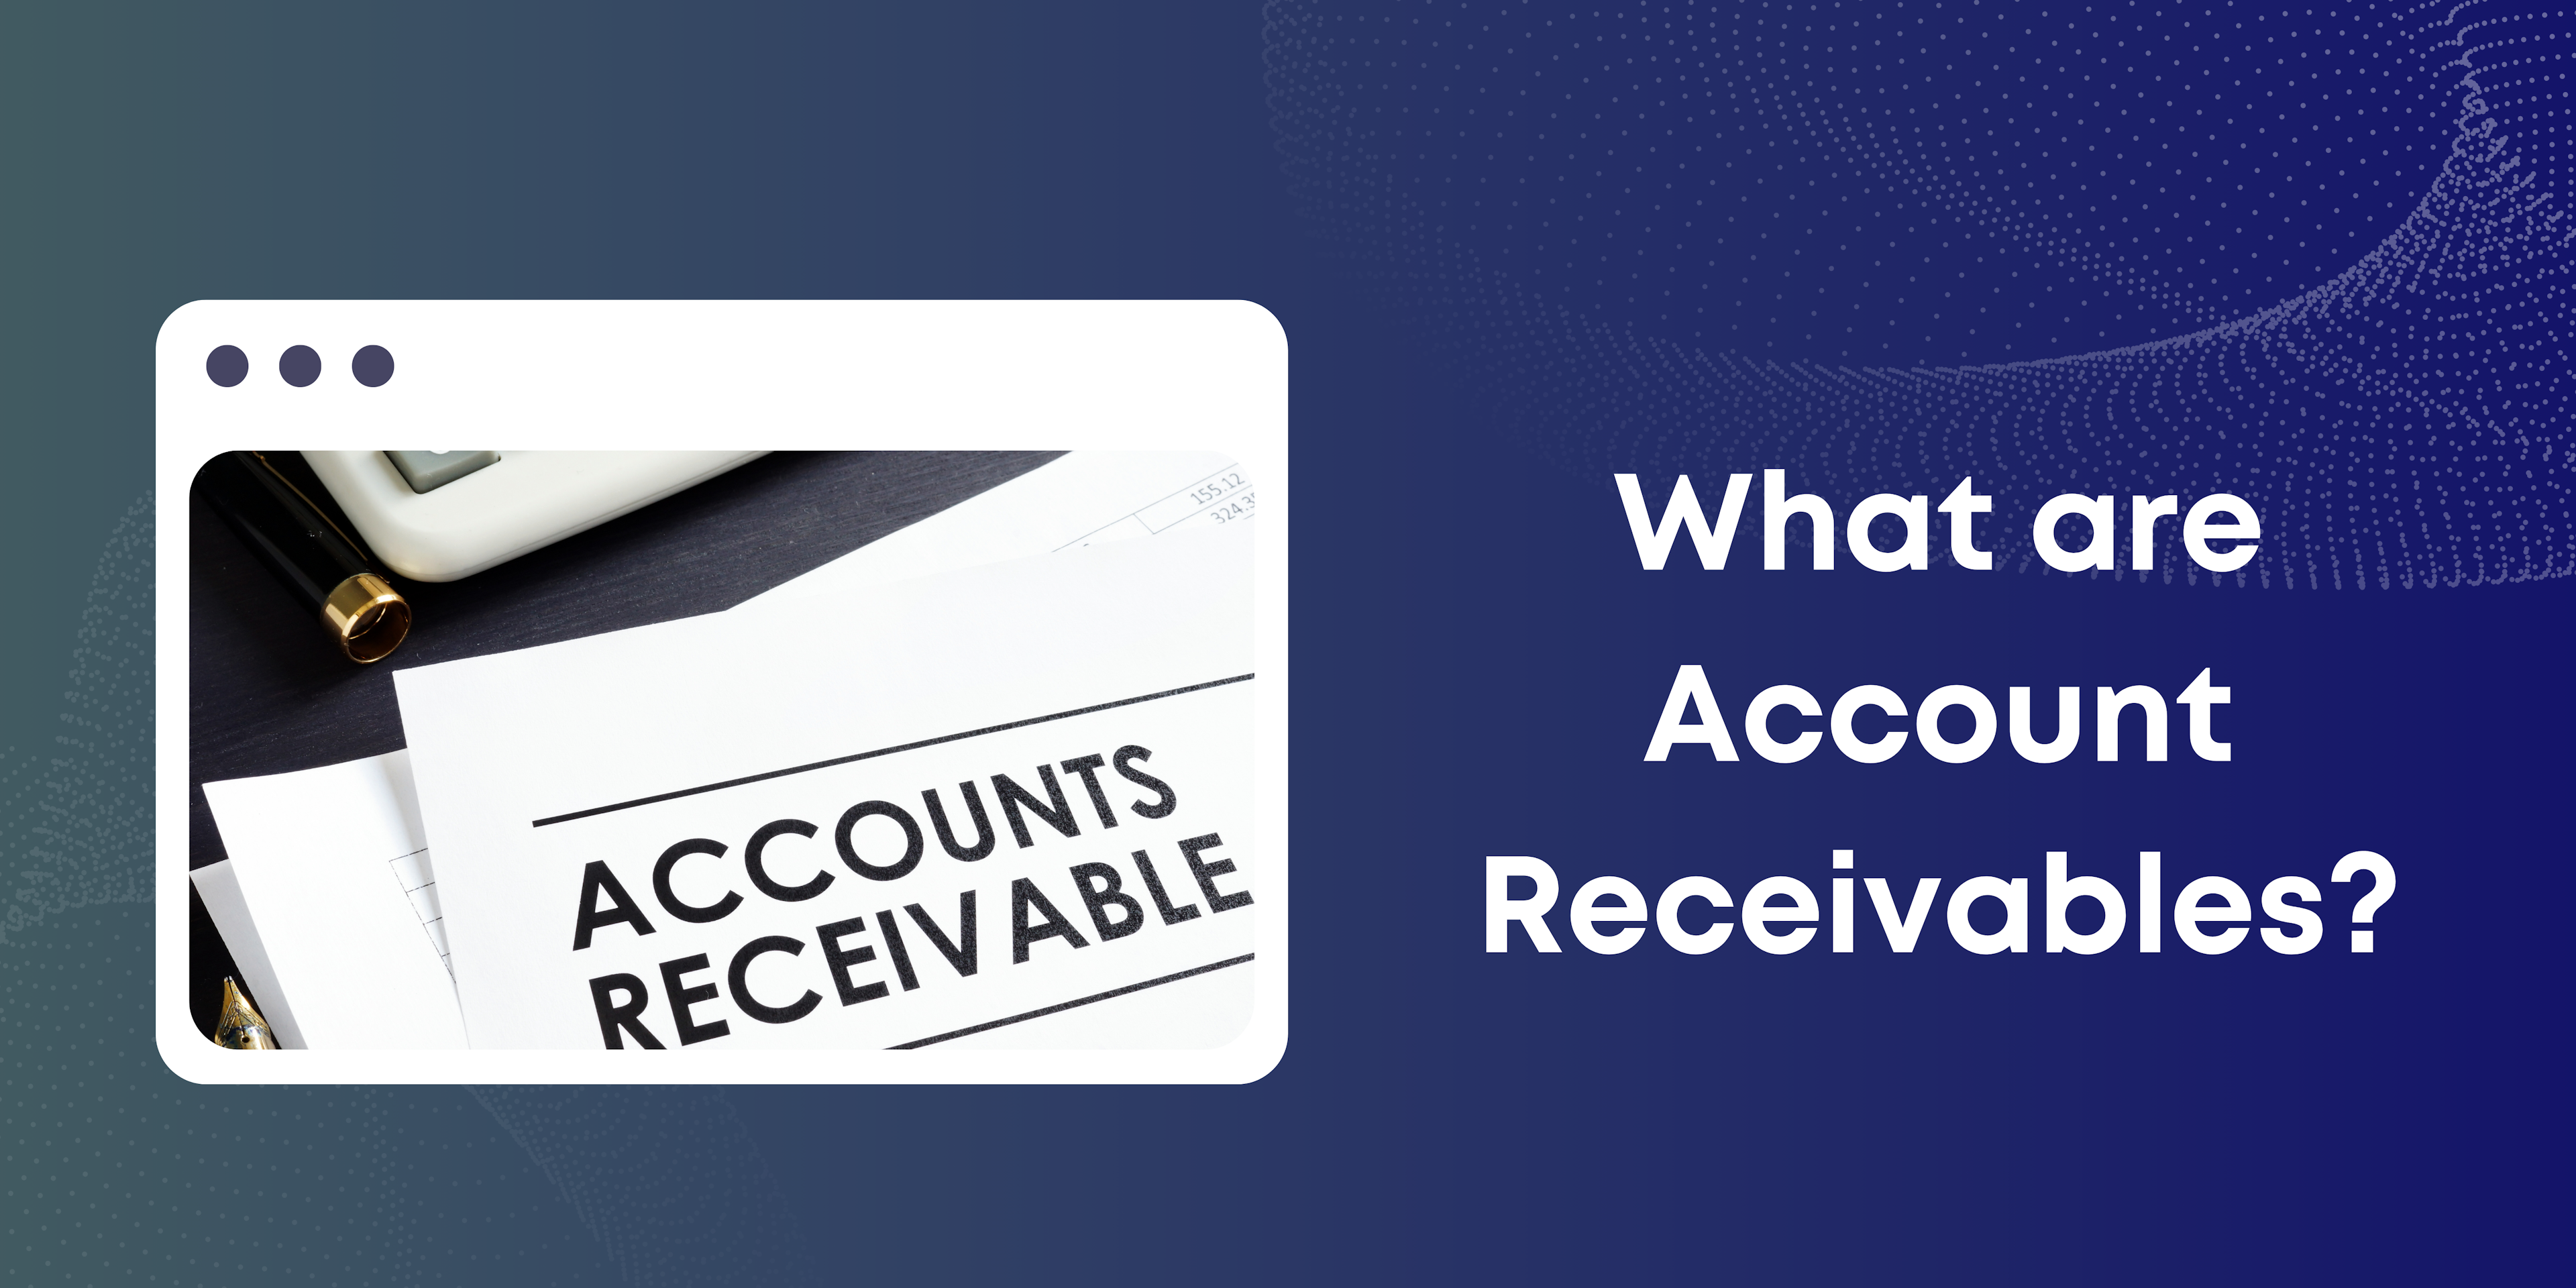 Companies have accounts receivable (AR) for goods and services they have given but have not been paid for